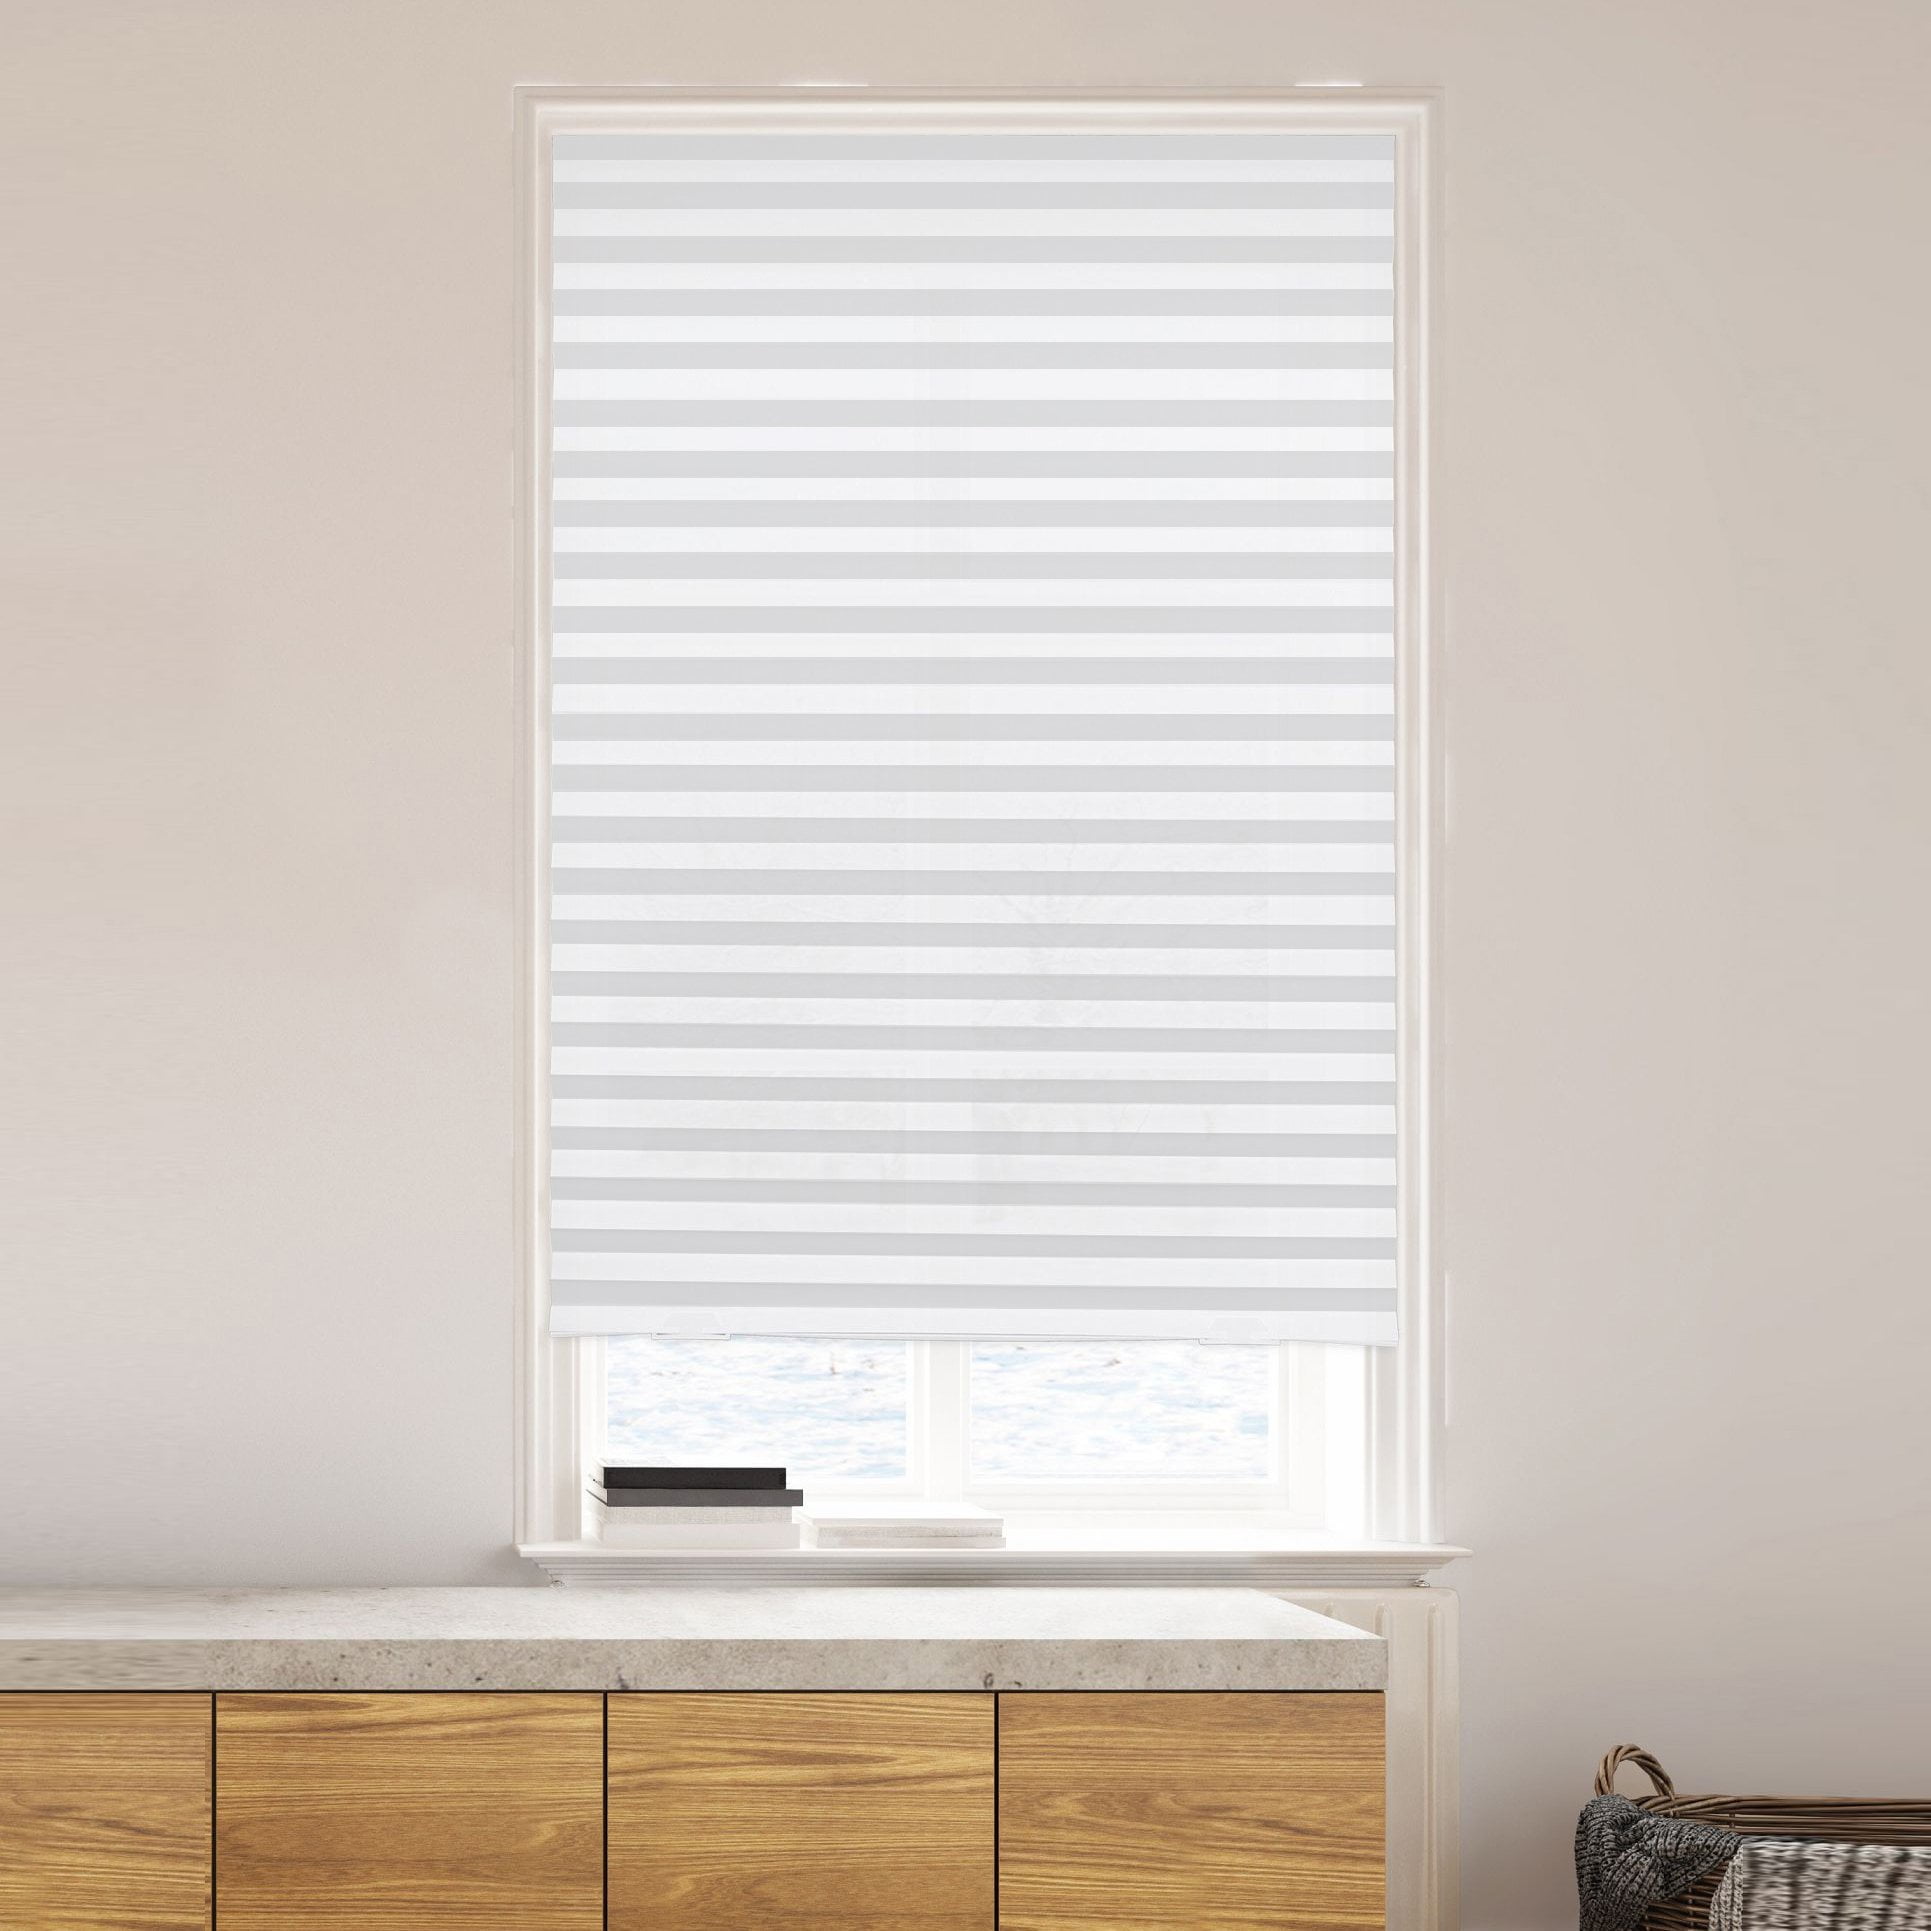 NEW Pleated Fabric Window Shades Blinds Cordless Light Filtering White 48" x 72" 